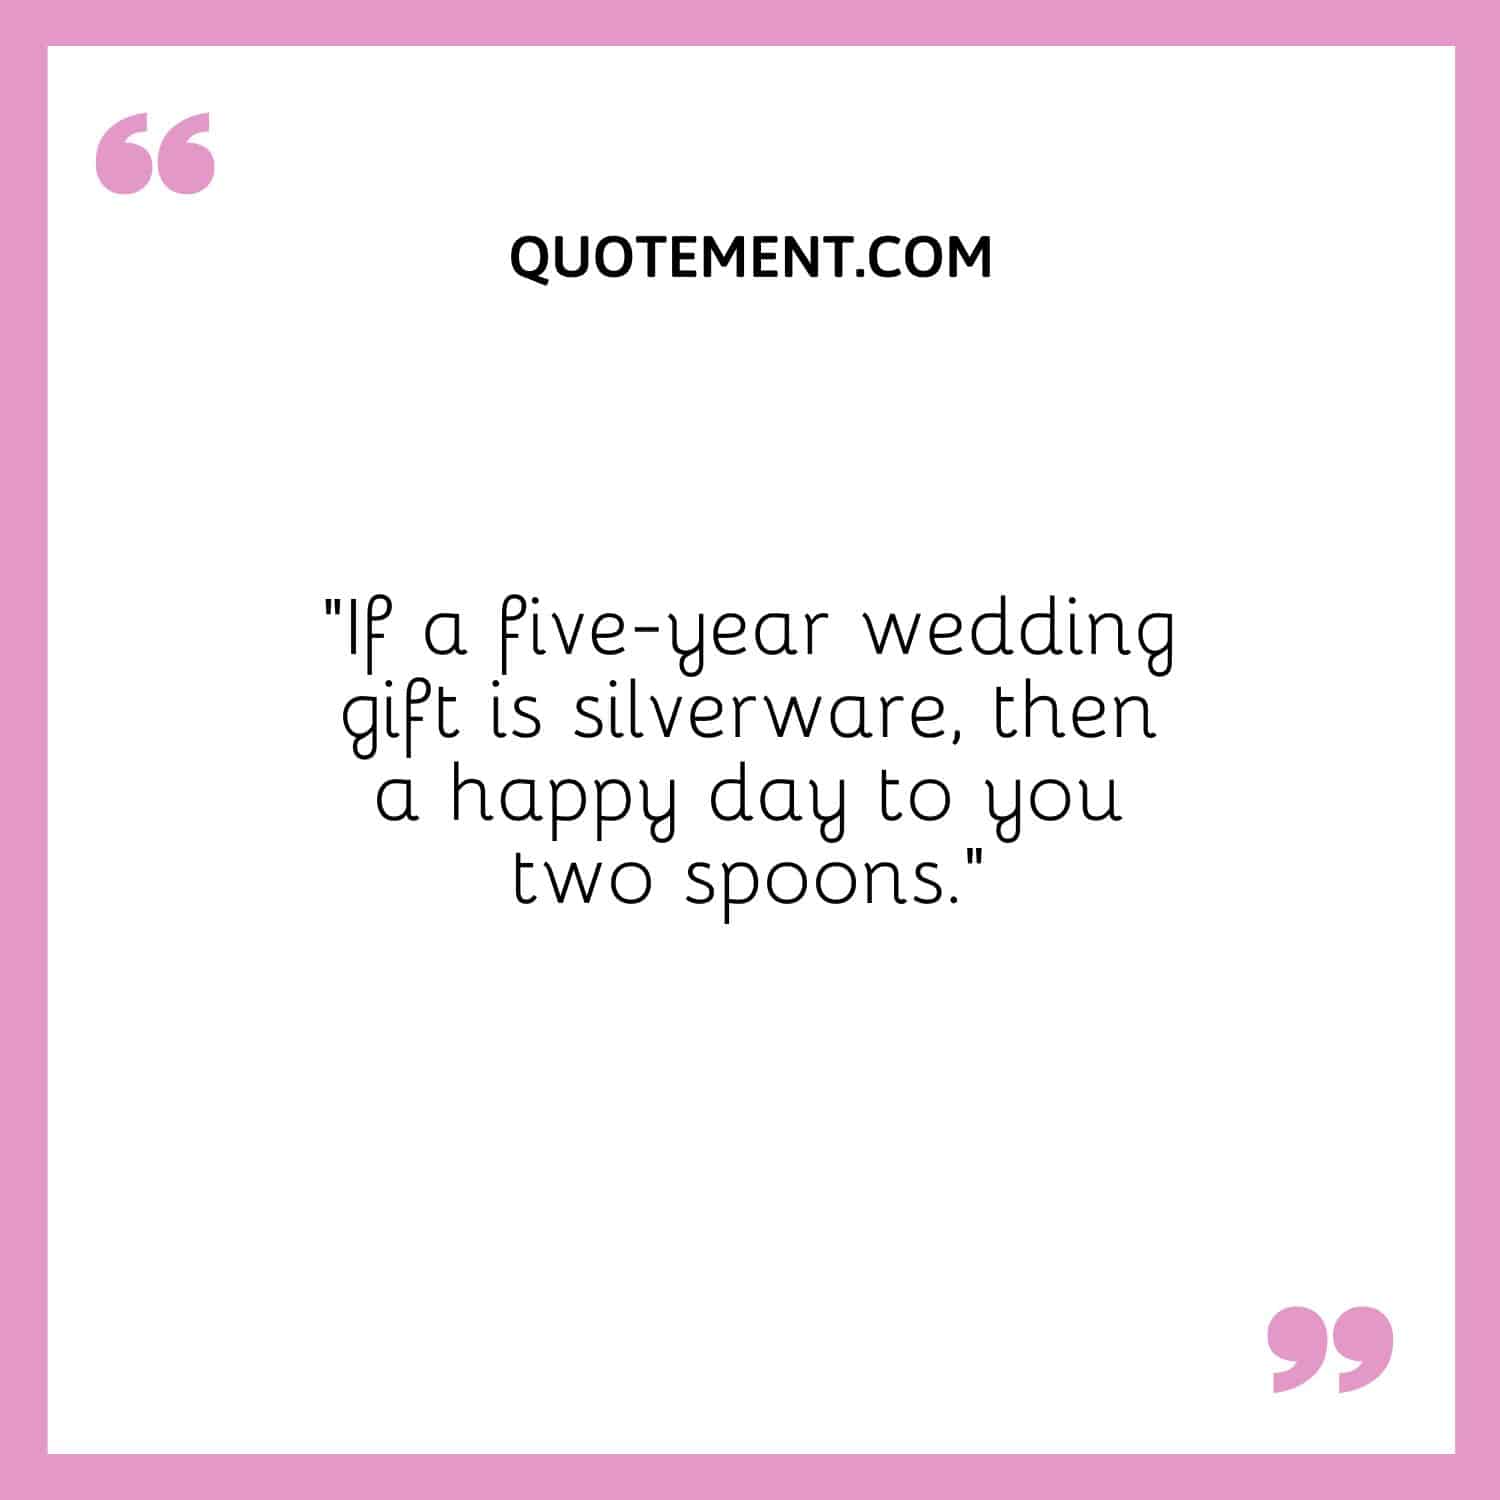 “If a five-year wedding gift is silverware, then a happy day to you two spoons.”